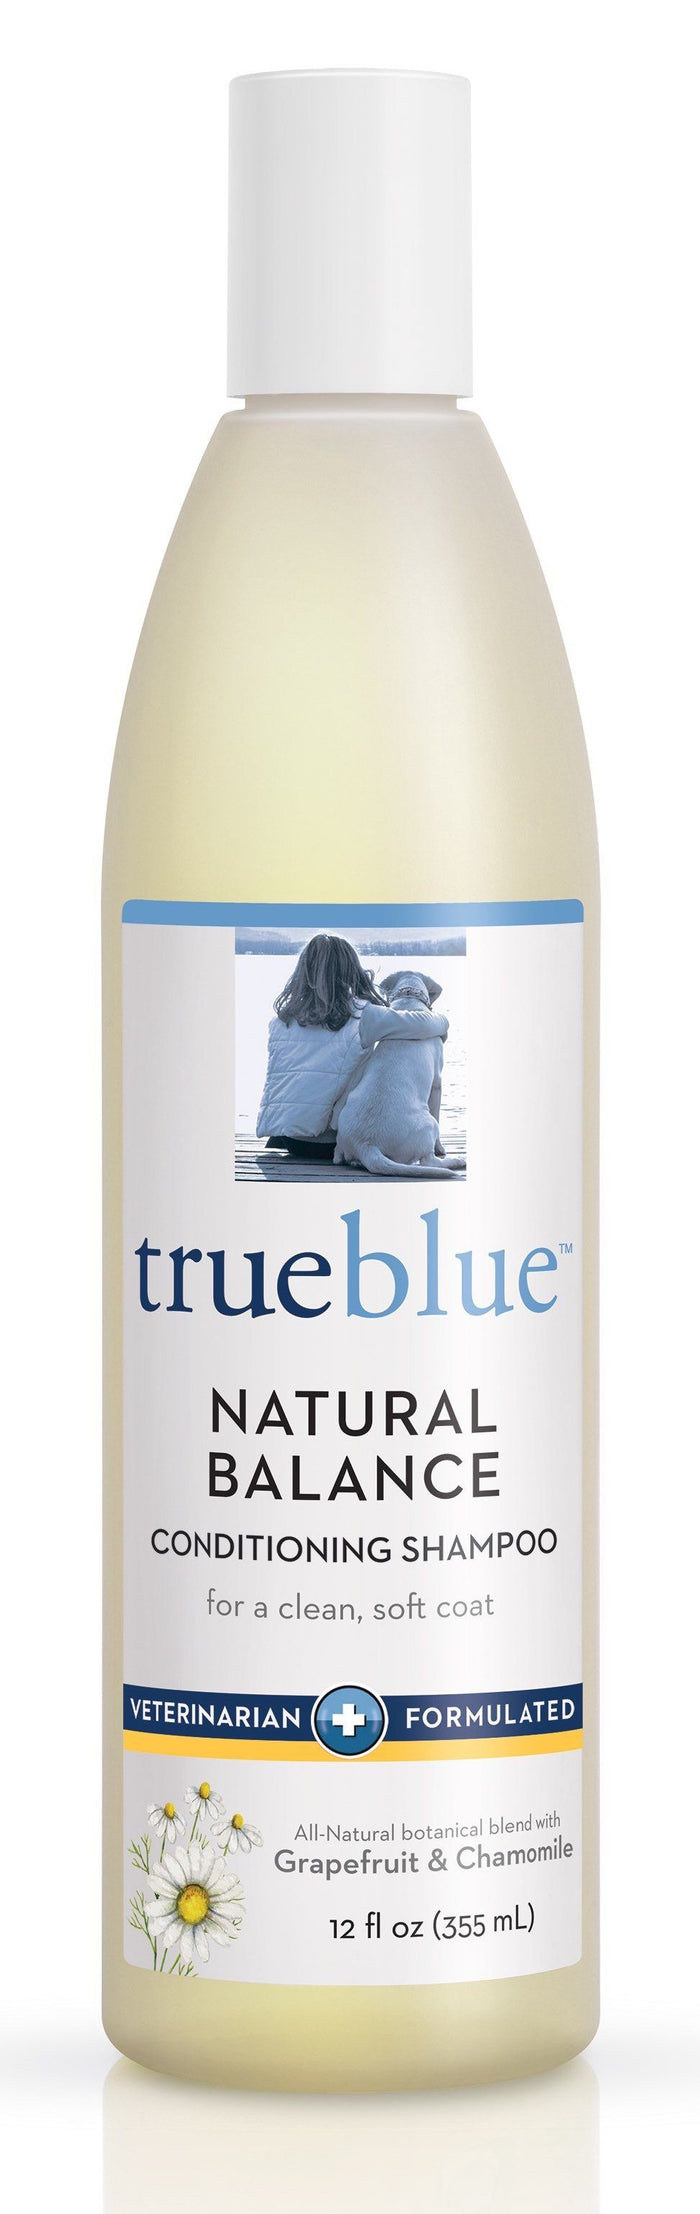 TrueBlue Cat and Dog Conditioning Shampoo Green Tea and Chamomile - 12 oz Bottle